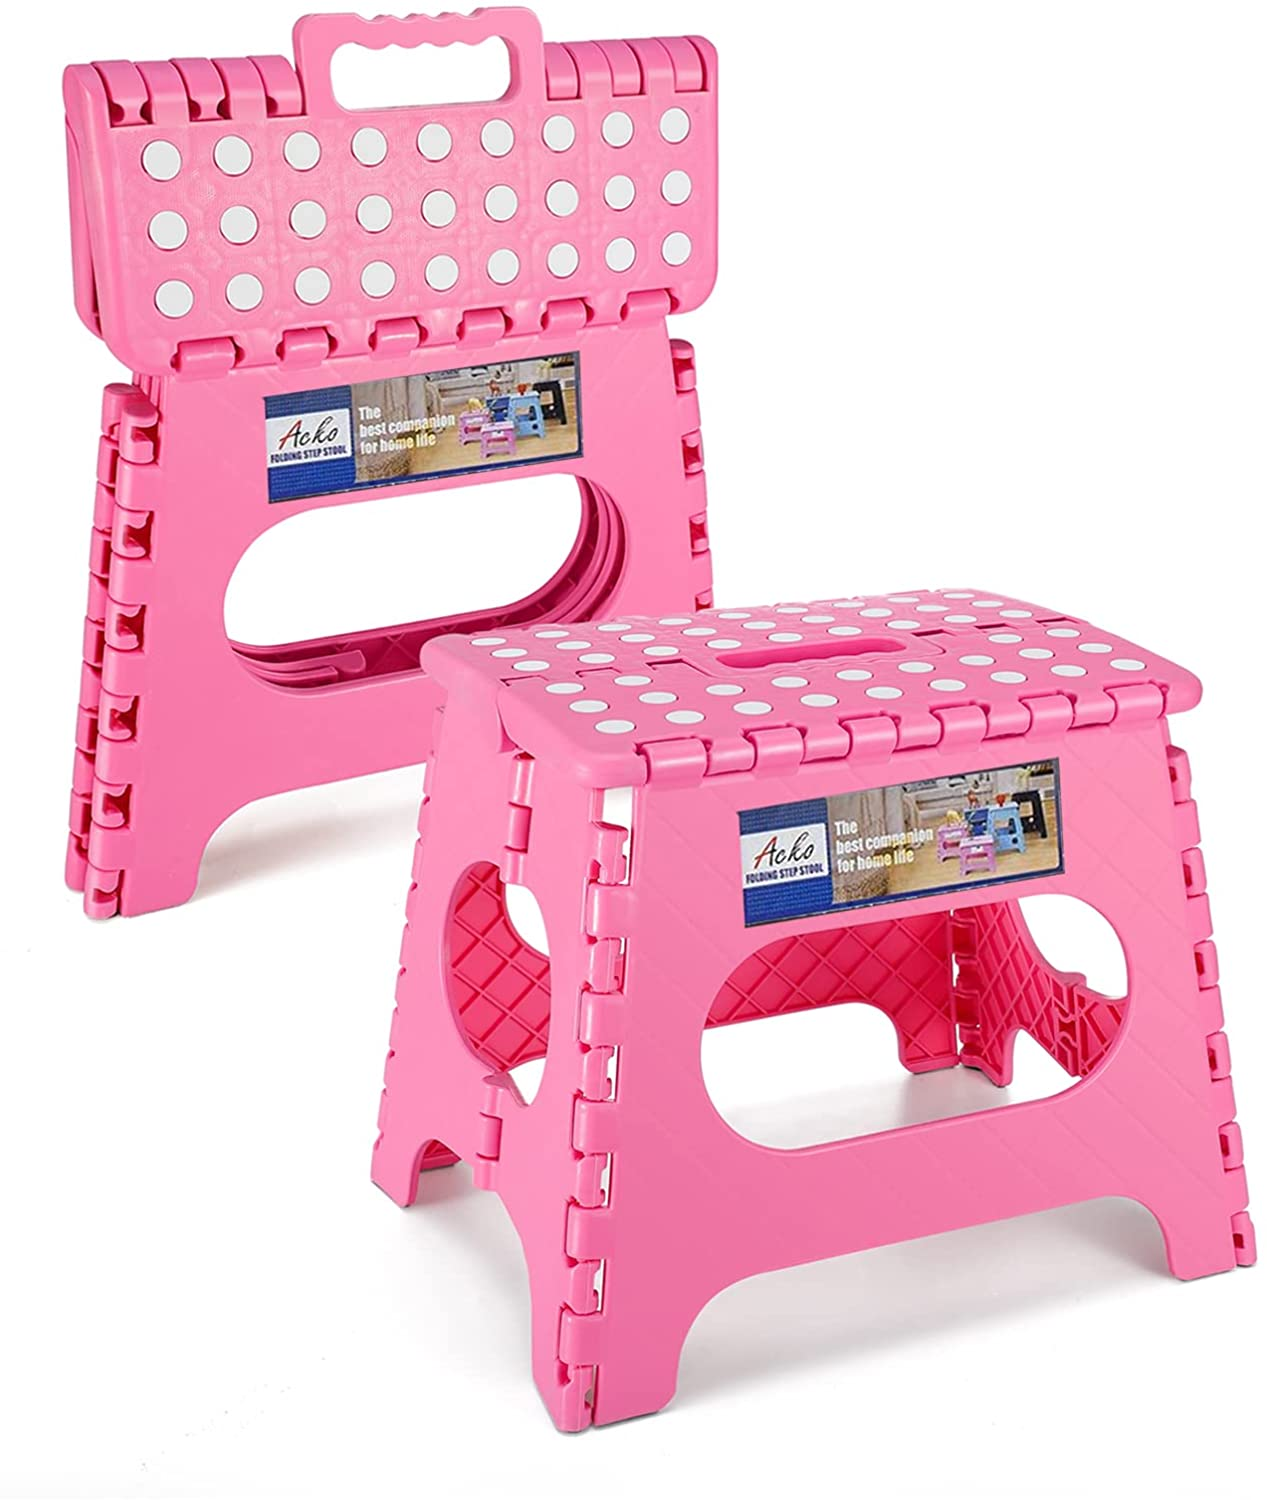 2 Pack 11 Inch Folding Step Stool Lightweight Plastic 9Inch Step Stool, Foldable Step Stool,Non Slip Folding Stools for Kids & Adults, Kitchen Bathroom Bedroom